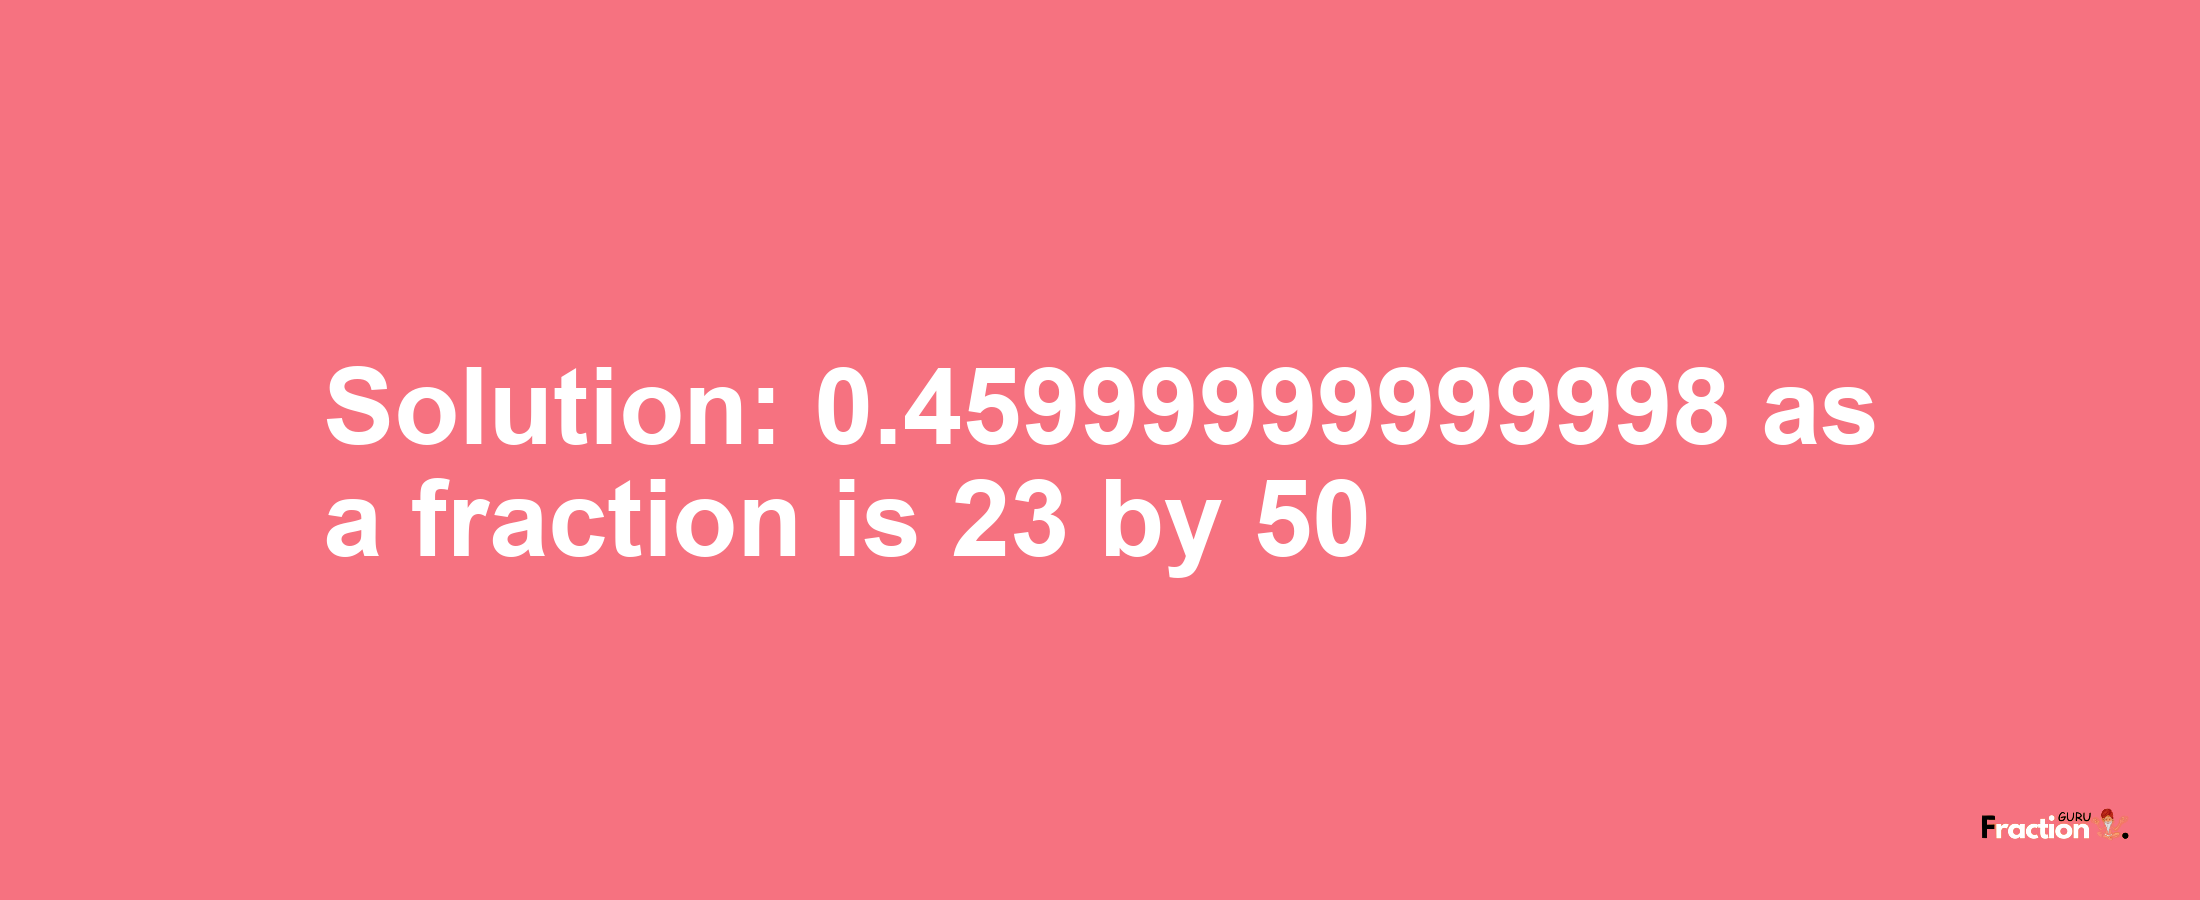 Solution:0.45999999999998 as a fraction is 23/50